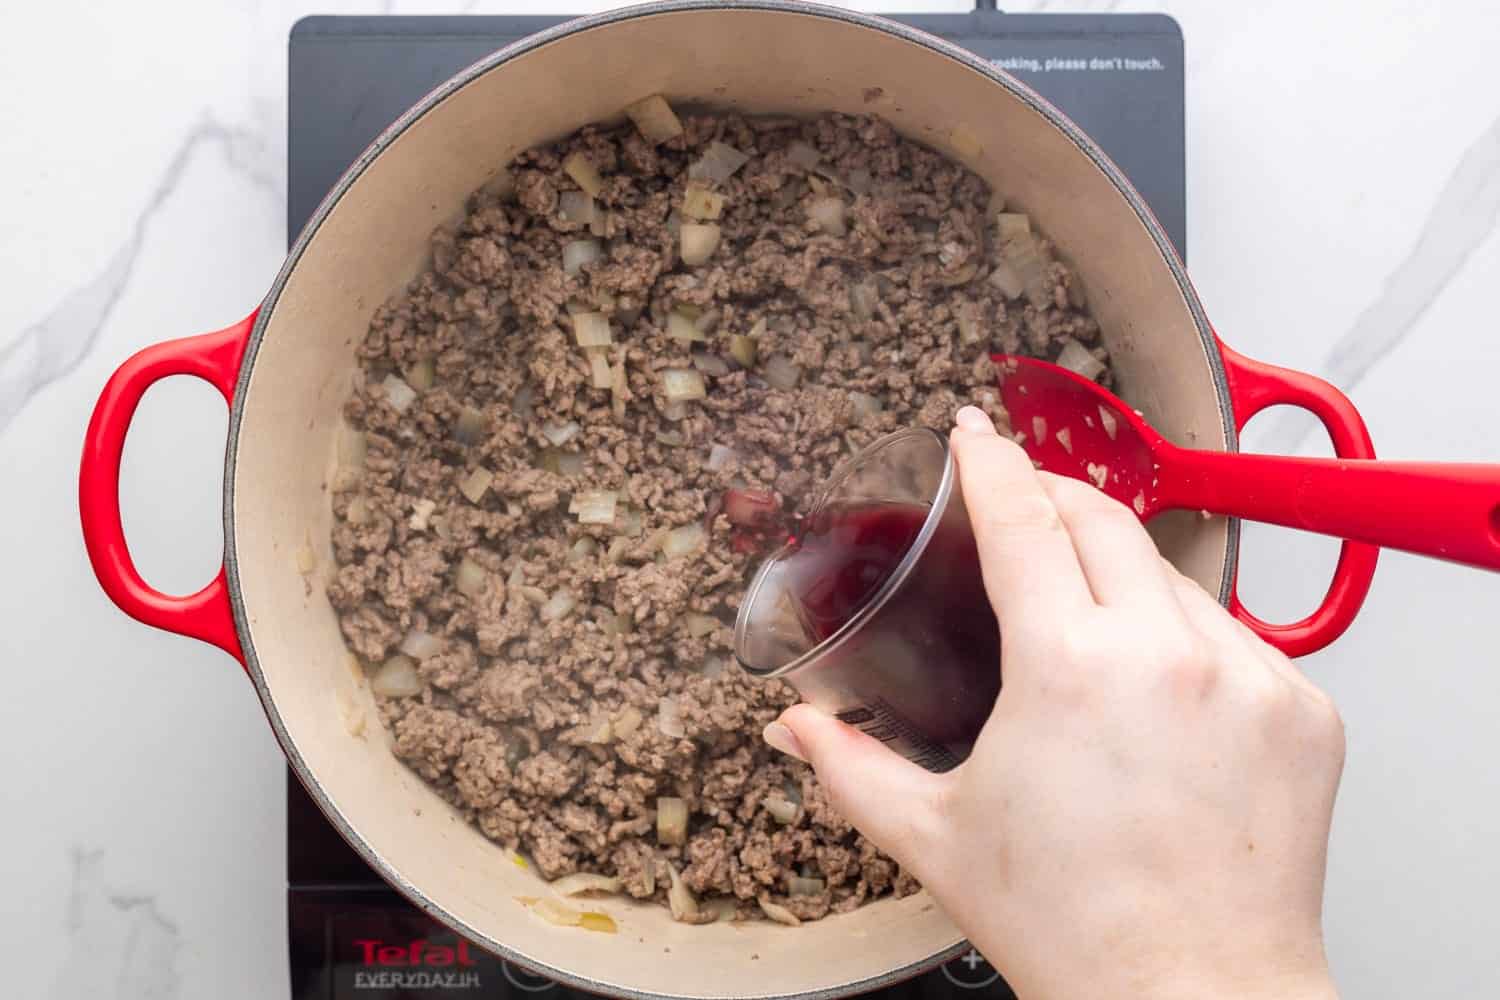 red wine added to cooked ground meat.